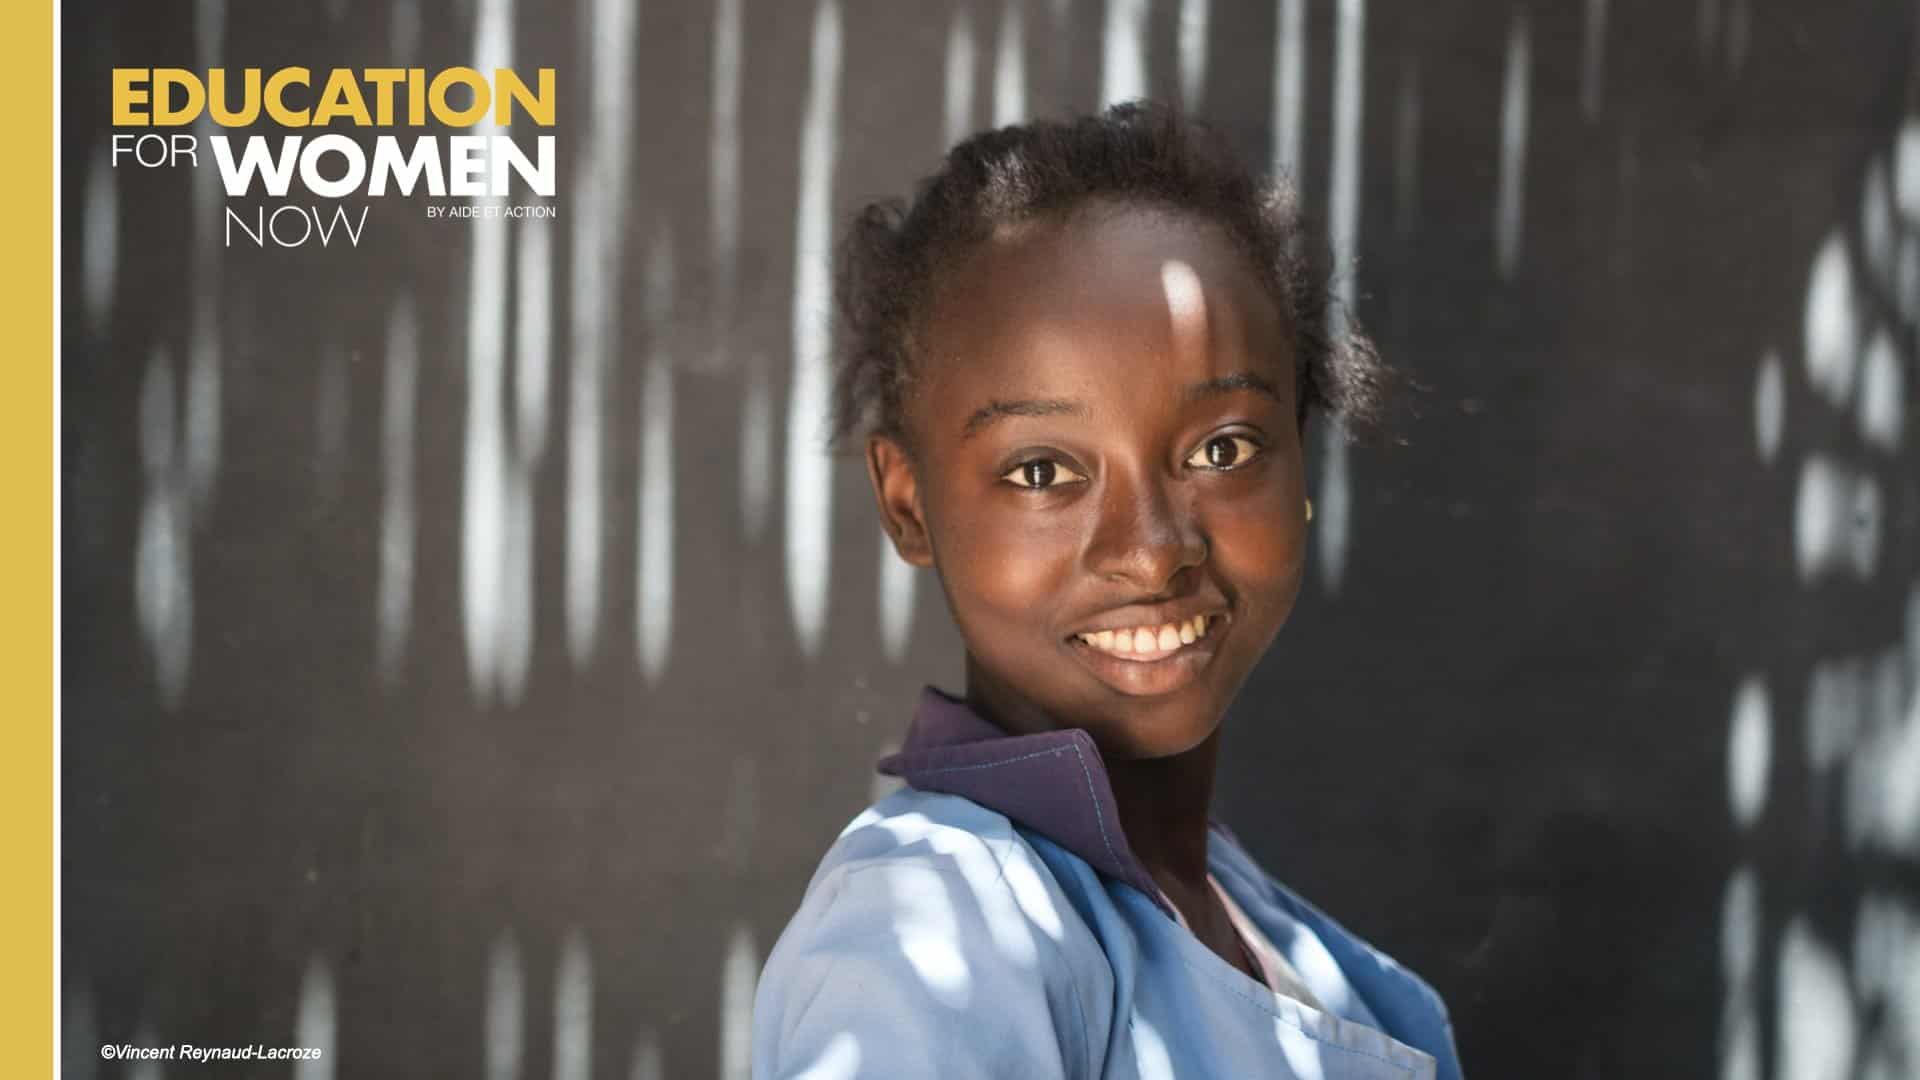 Press release - Launch of Aide et Action's global philanthropic campaign: "Education for Women Now